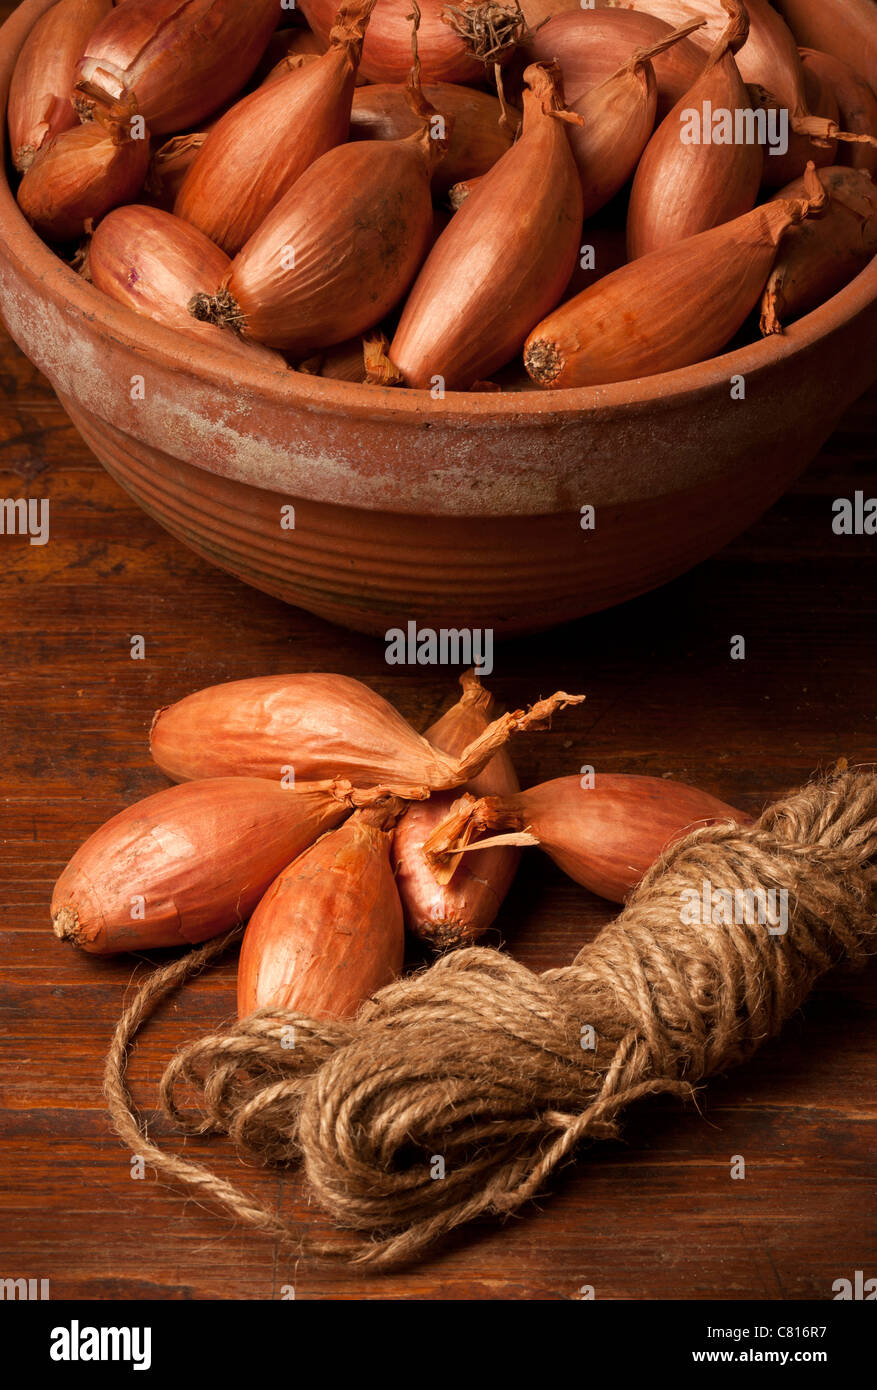 Organic Longor shallots in terracotta bowl garden twine in foreground Stock Photo